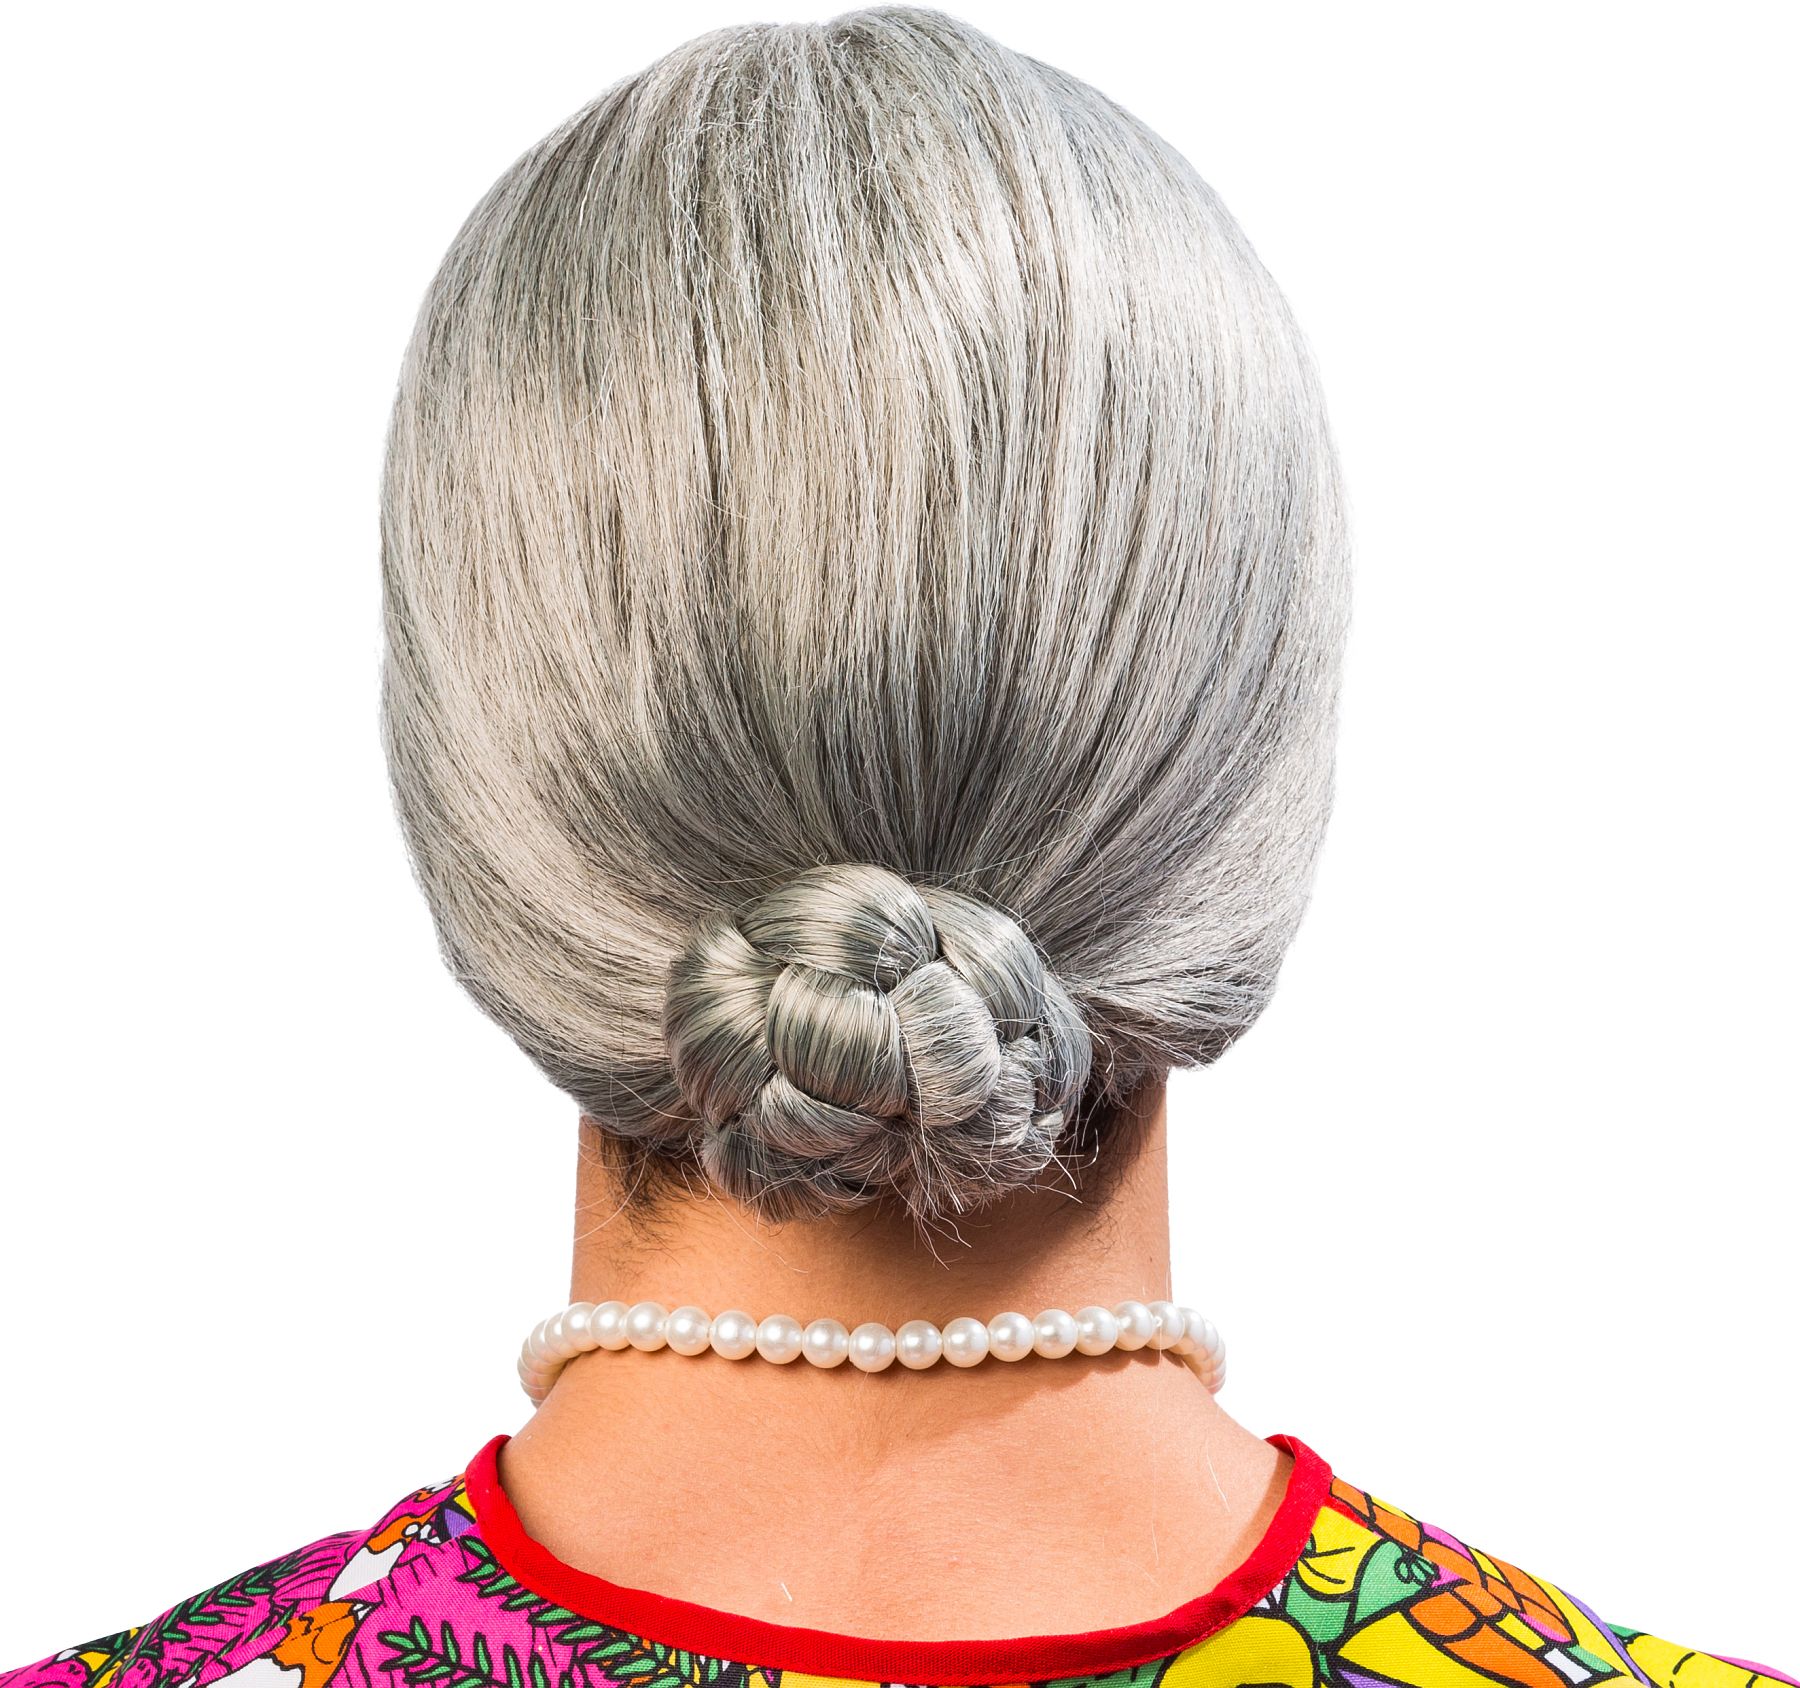 Grandmother wig with braided Dutt